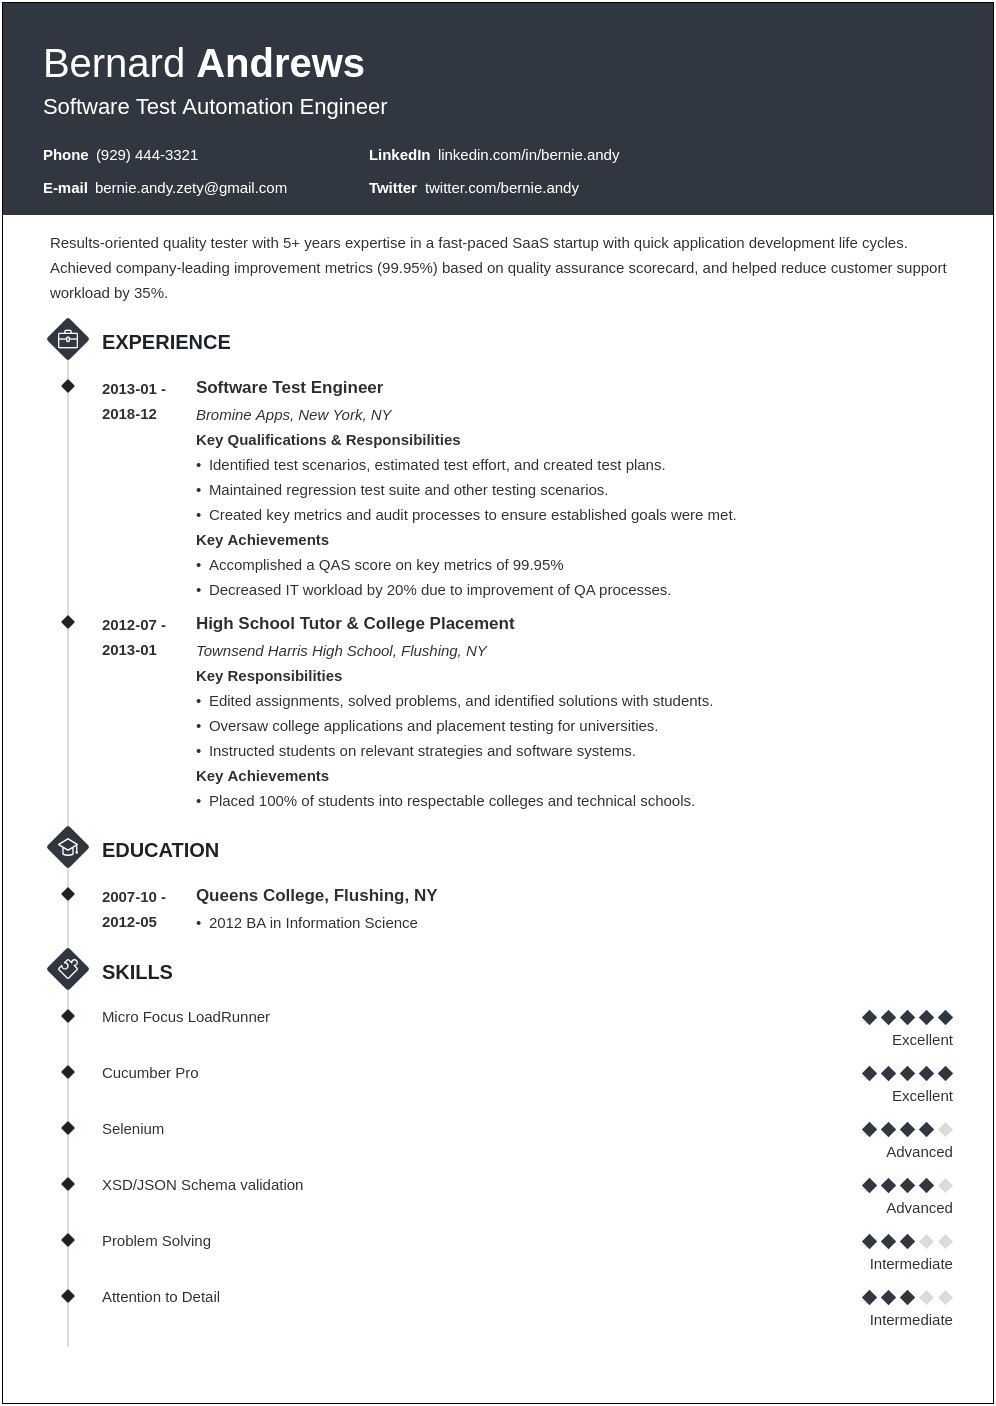 Quality Control Plan Sample Template Resume